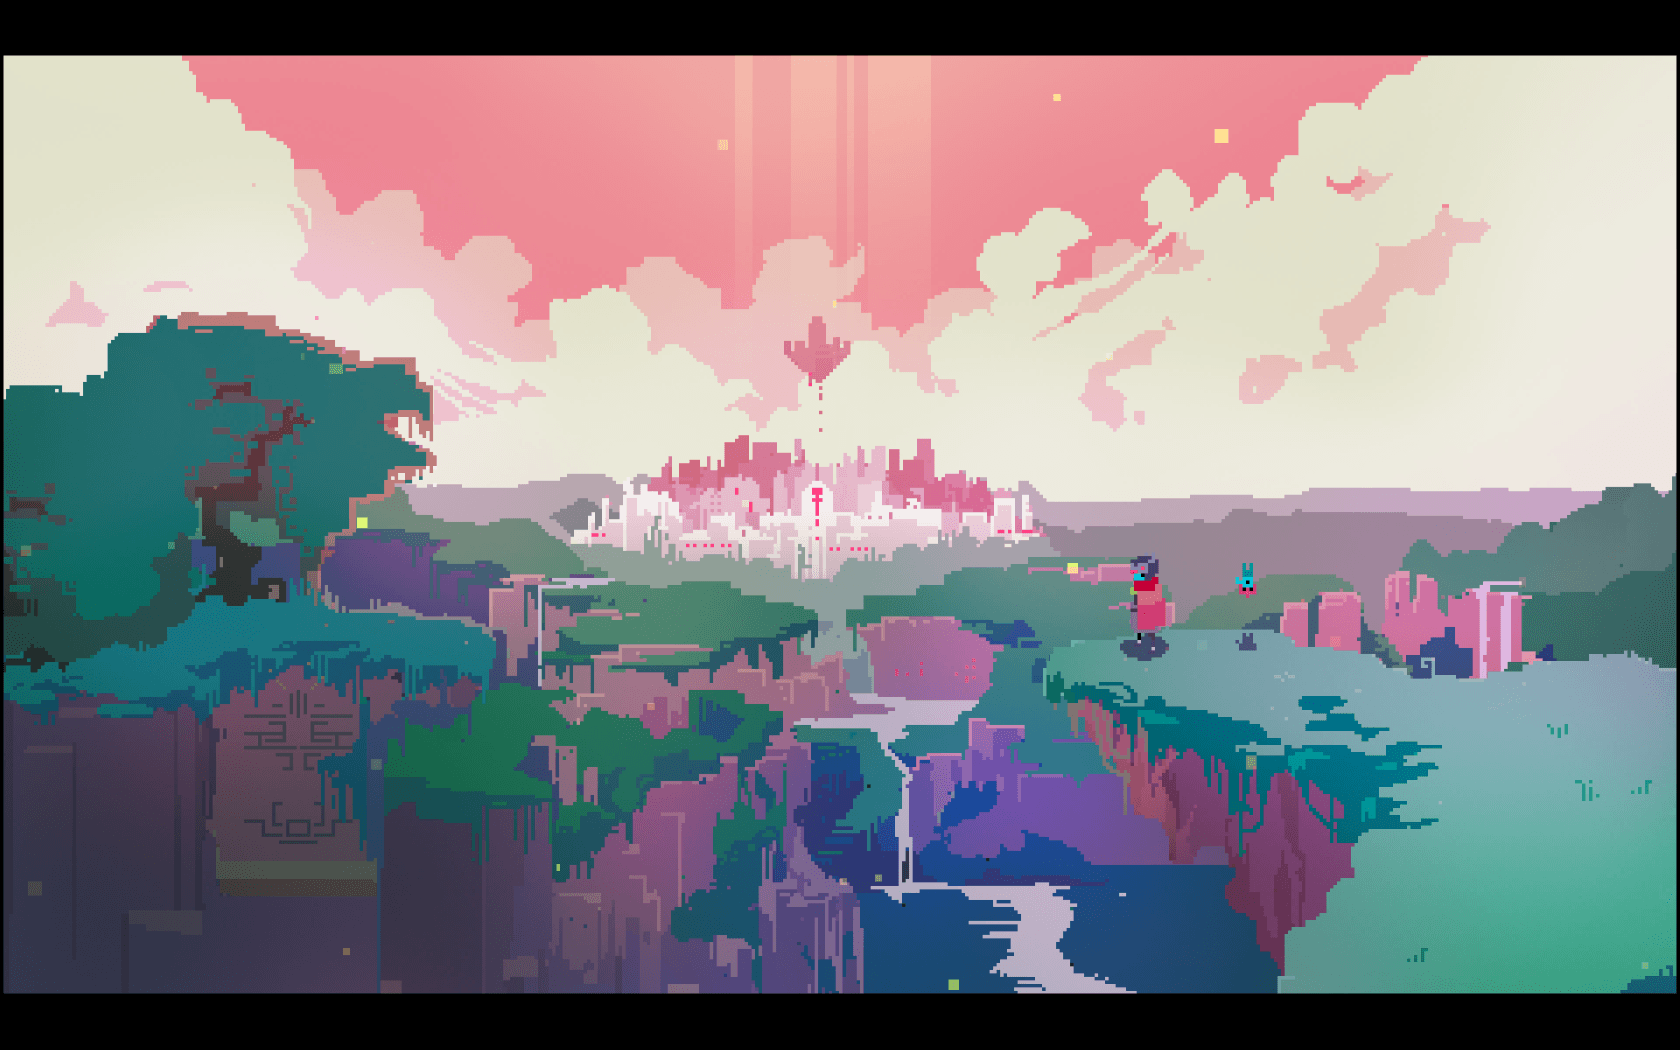 A pixelated character stands on a cliff overlooking a city in the distance. - Pixel art